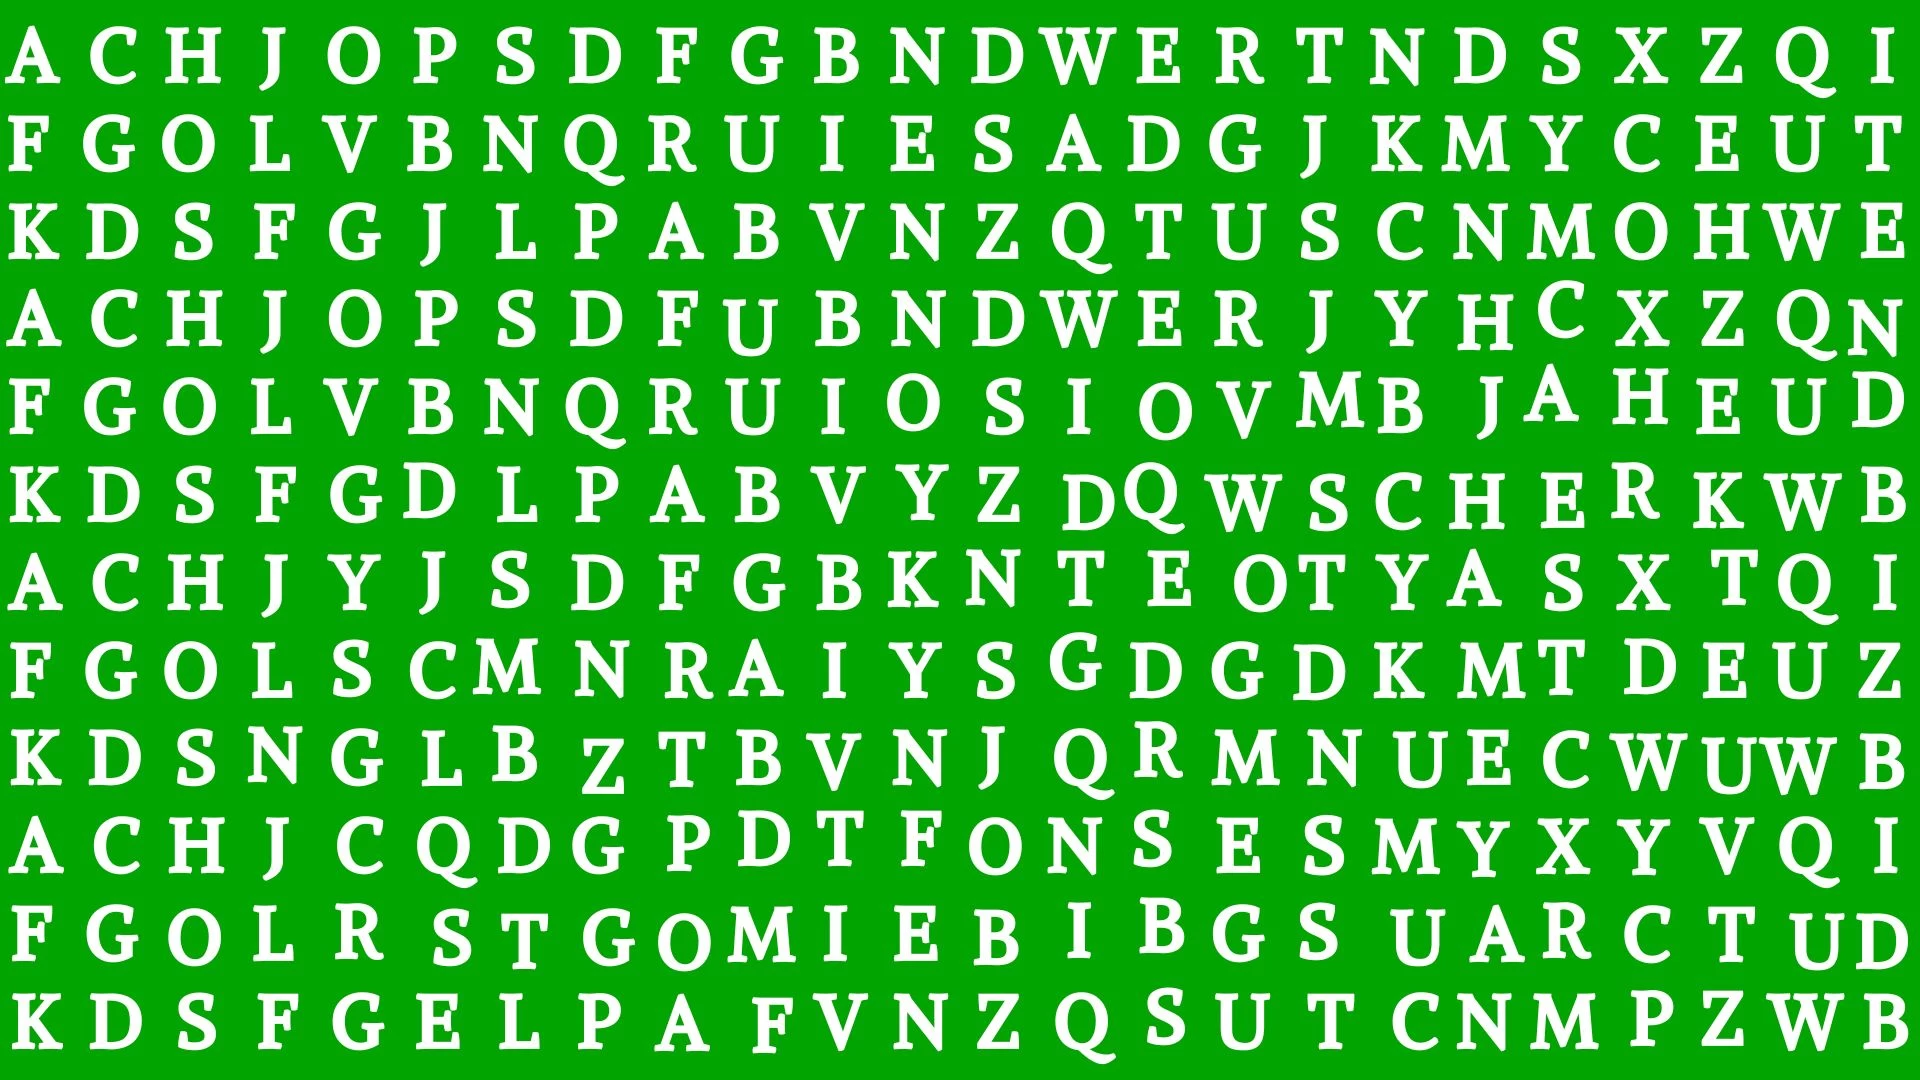 Optical Illusion Brain Test: If You Have Eagle Eyes Find the Word Graphic in 10 Seconds